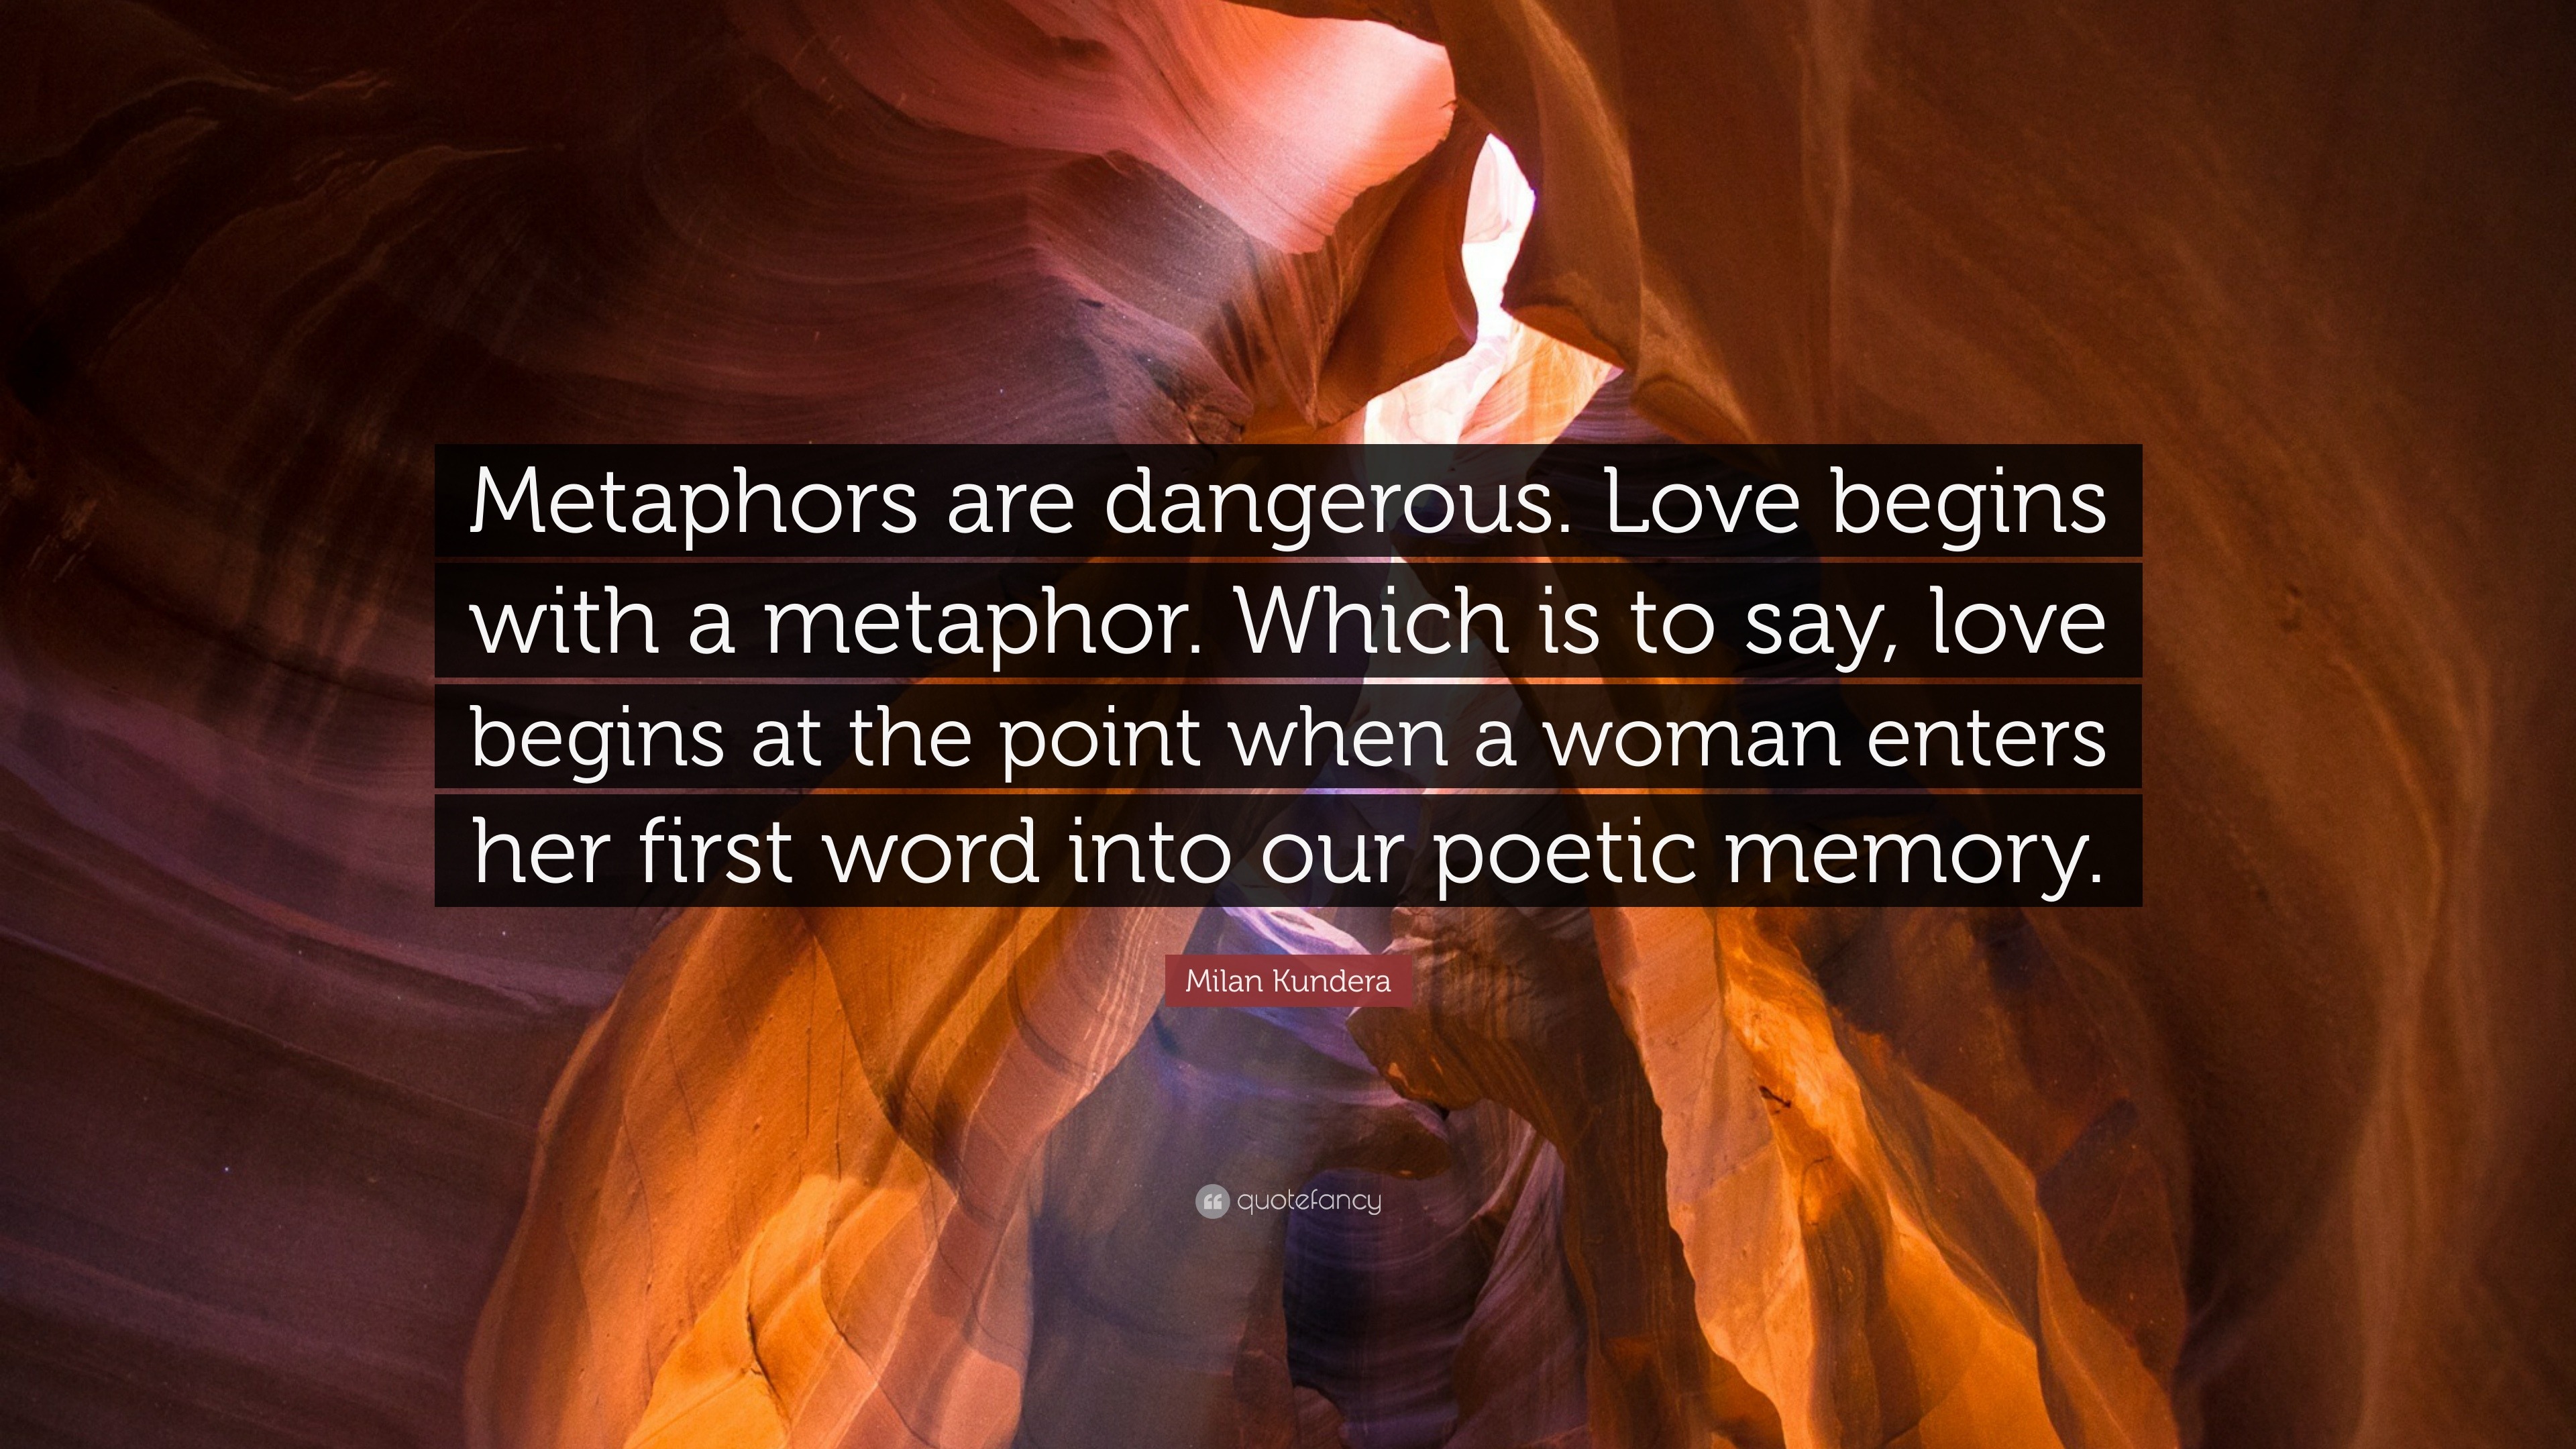 Milan Kundera Quote “metaphors Are Dangerous Love Begins With A Metaphor Which Is To Say